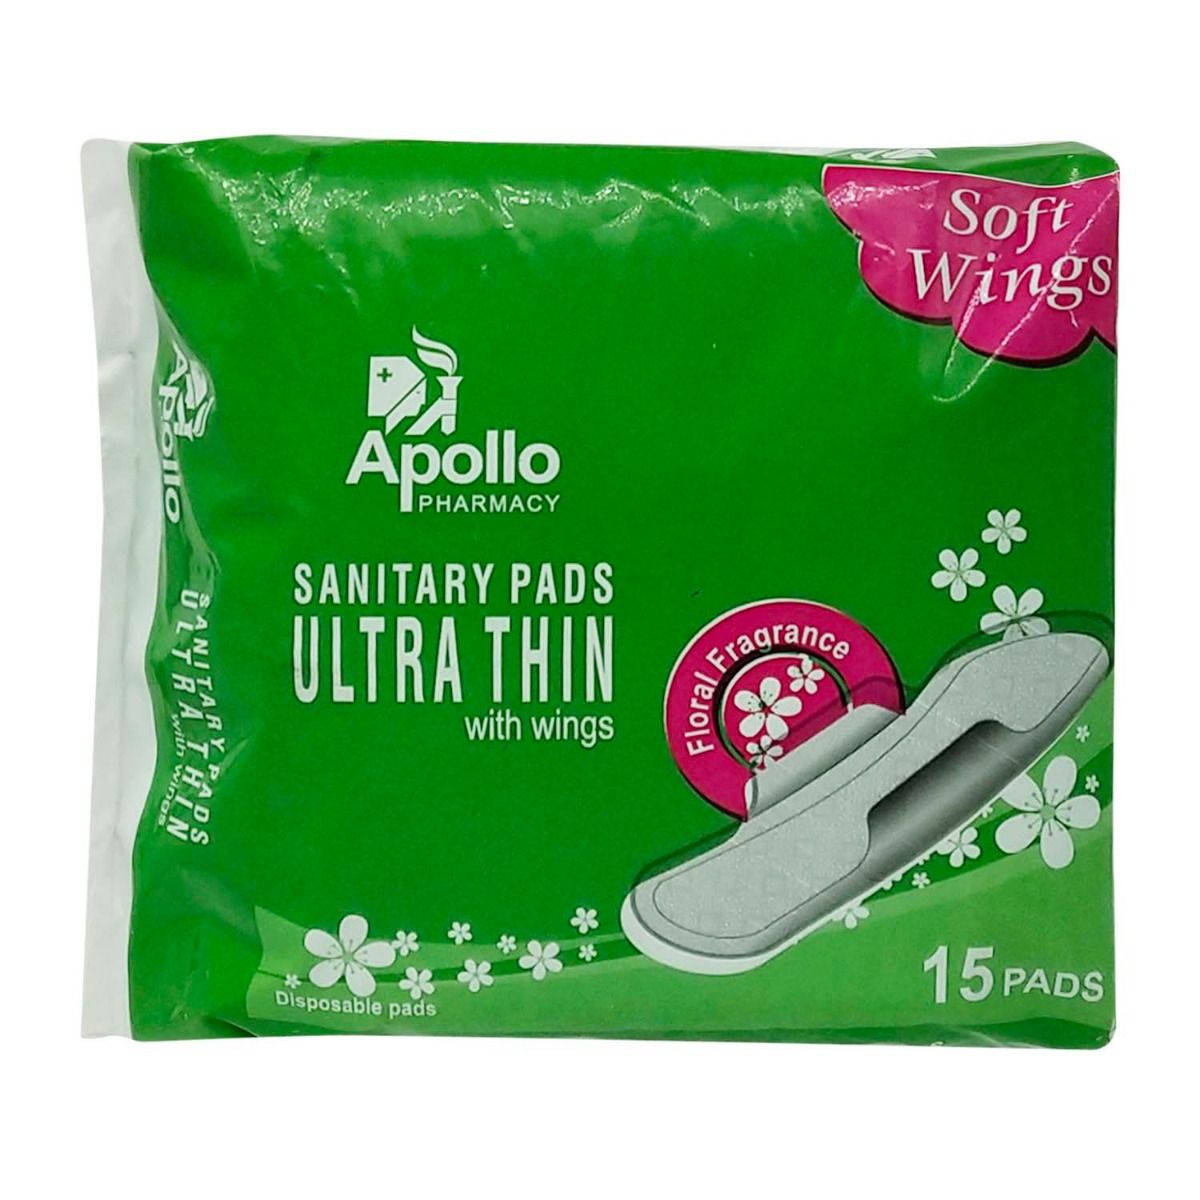 Buy Apollo Pharmacy Ultrathin Sanitary Pads with Wings, 15 Count Online